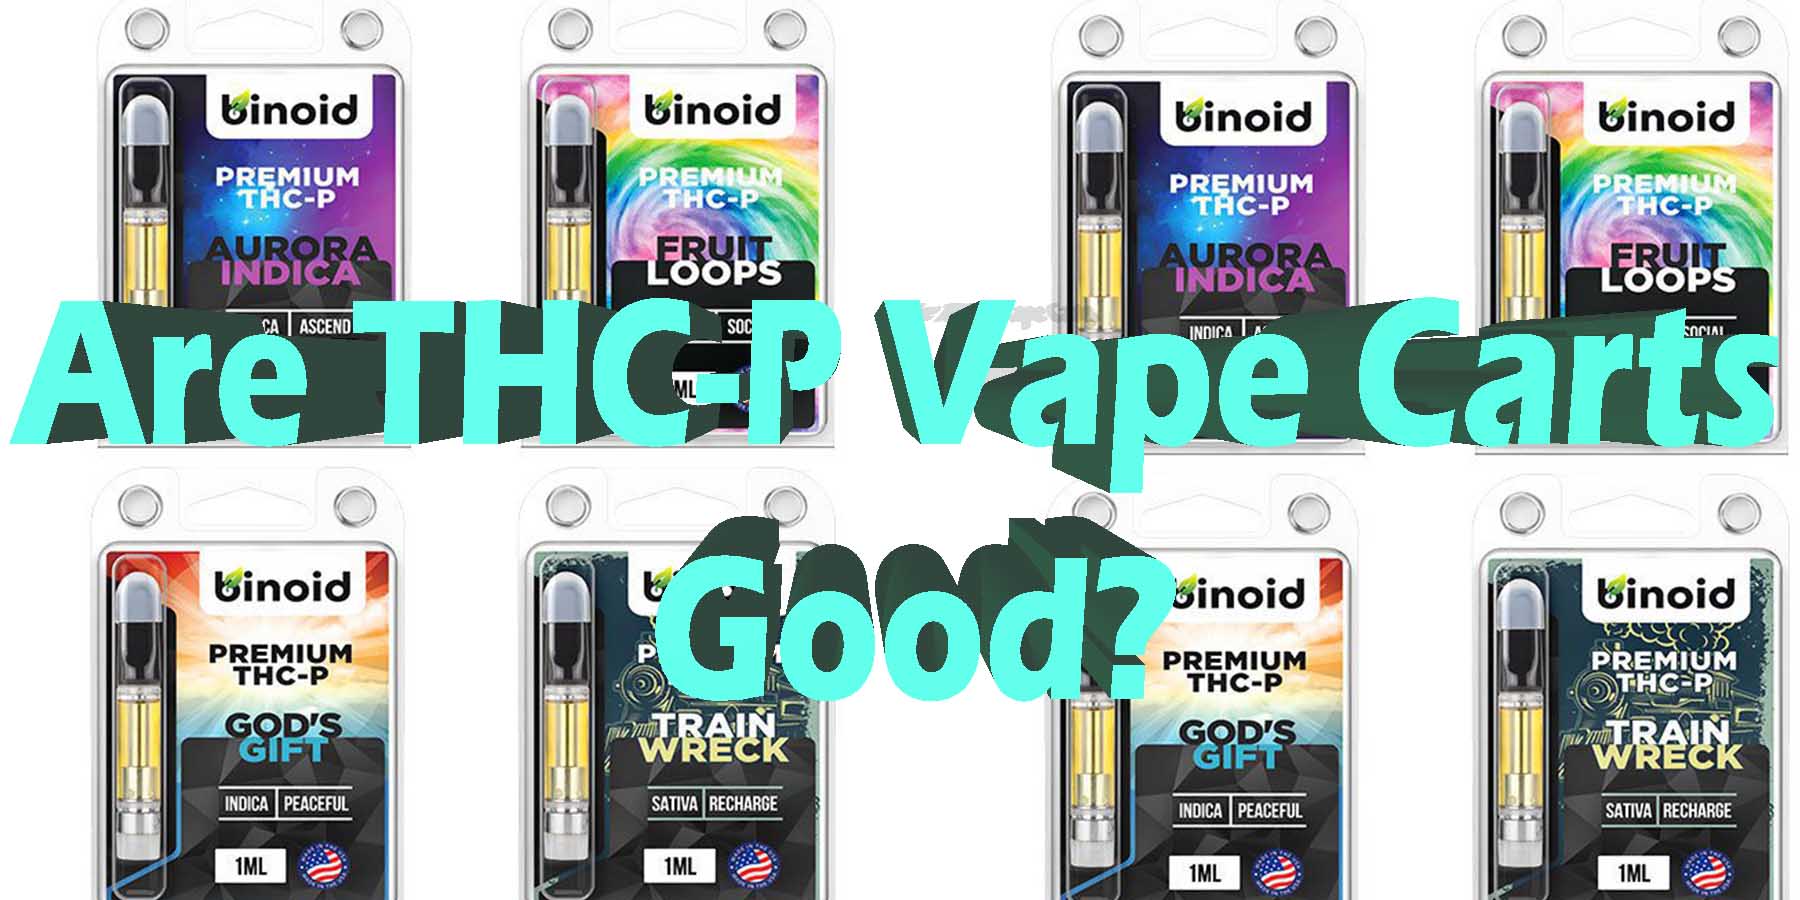 Are THC-P Vape Carts Good WhereToGet HowToGetNearMe BestPlace LowestPrice Coupon Discount For Smoking Best High Smoke Shop Online Near Me StrongestBrand BestBrand Binoid